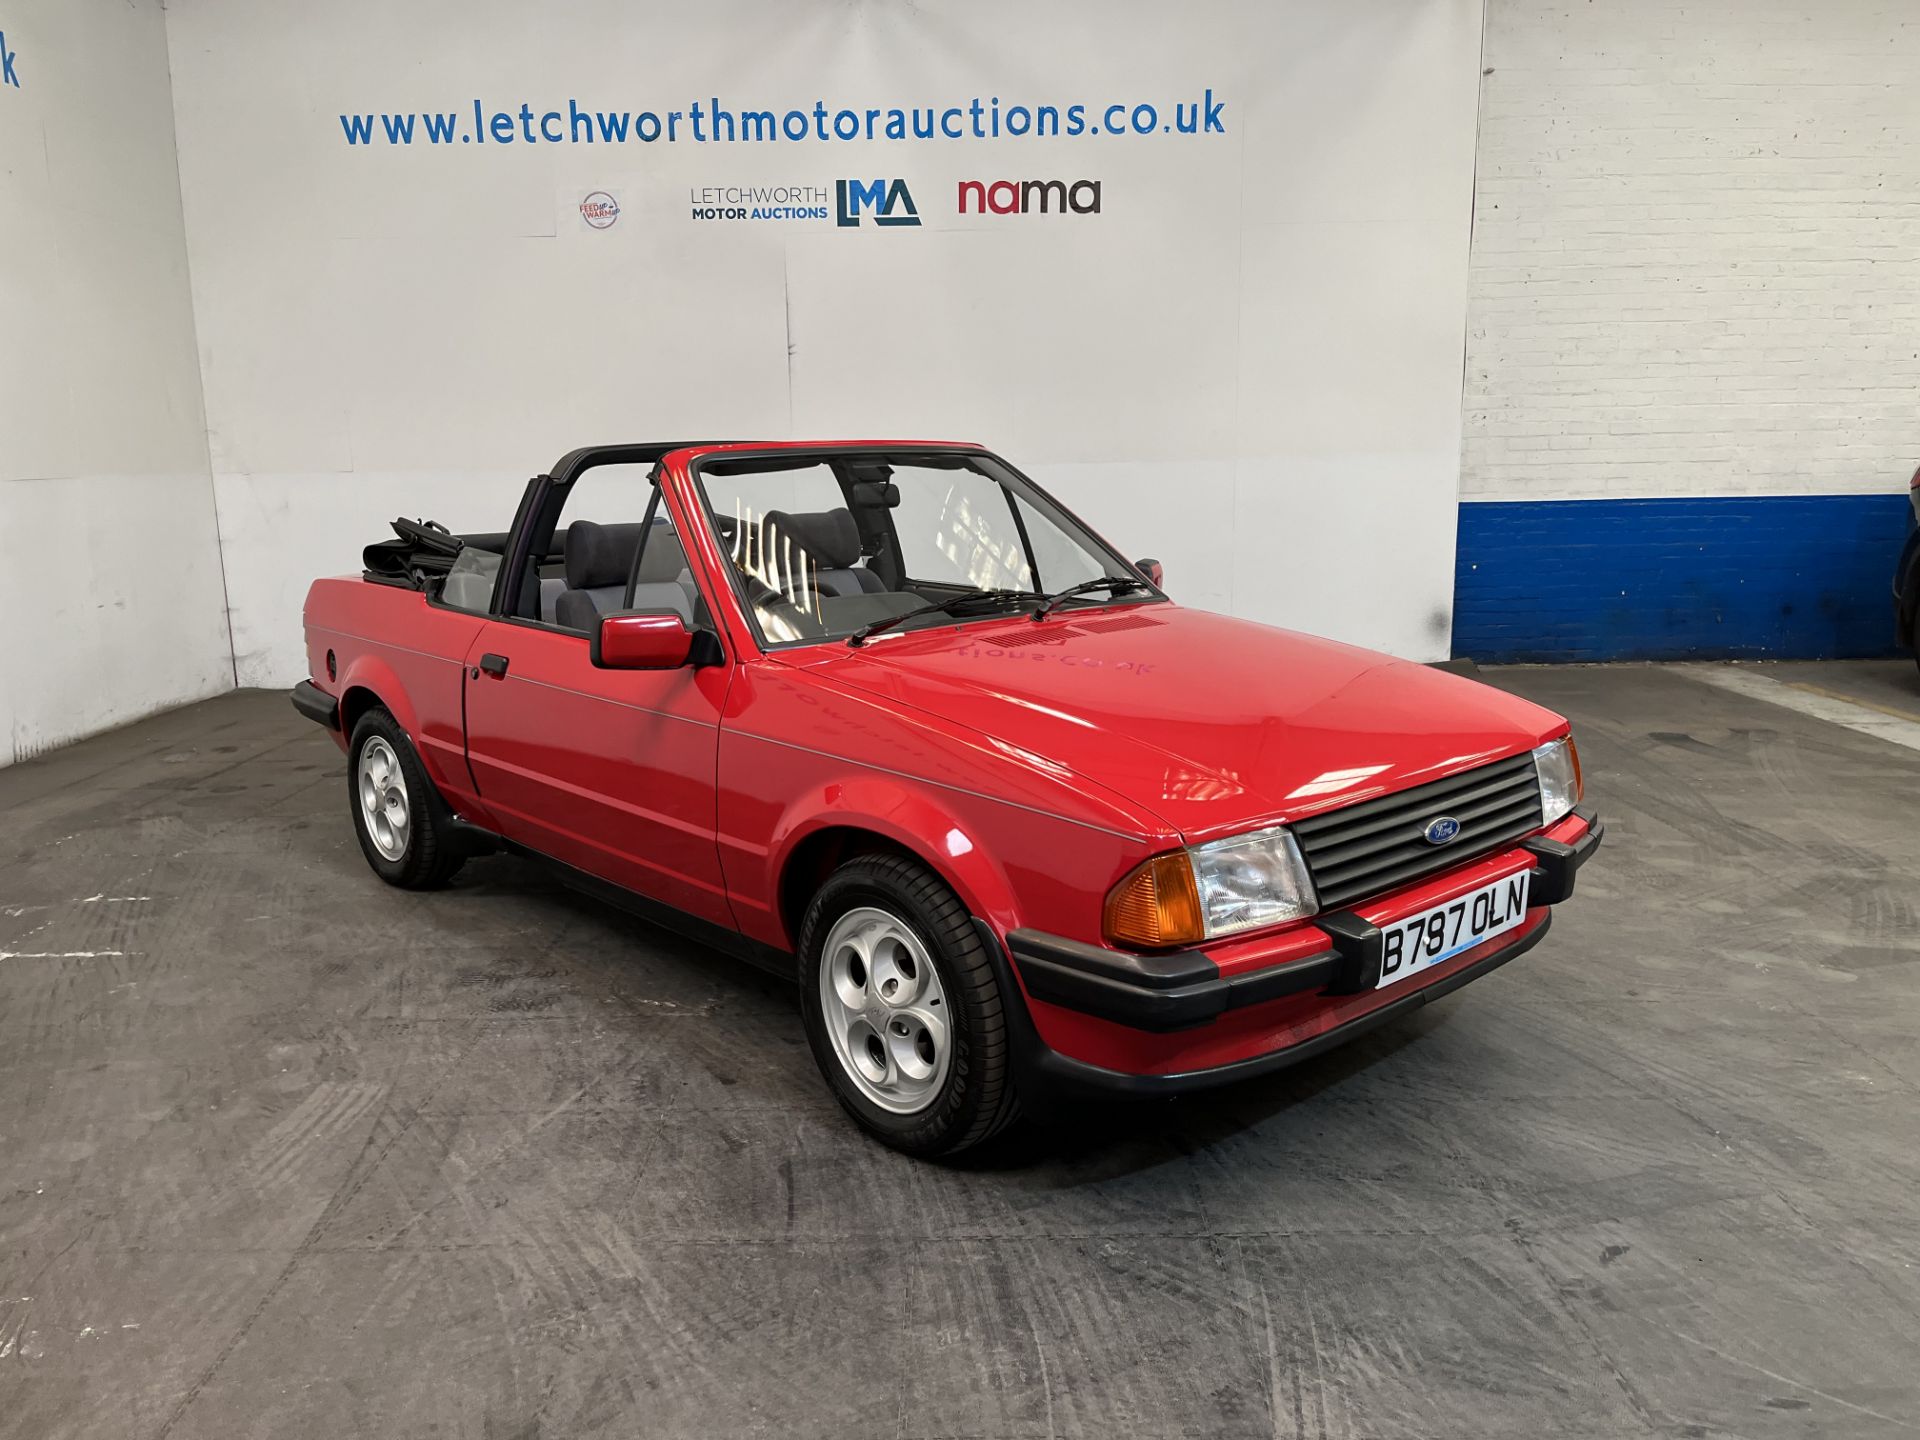 1985 Ford Escort 1.6i Cabriolet - 1597cc *ONE OWNER FROM NEW* - Image 2 of 24